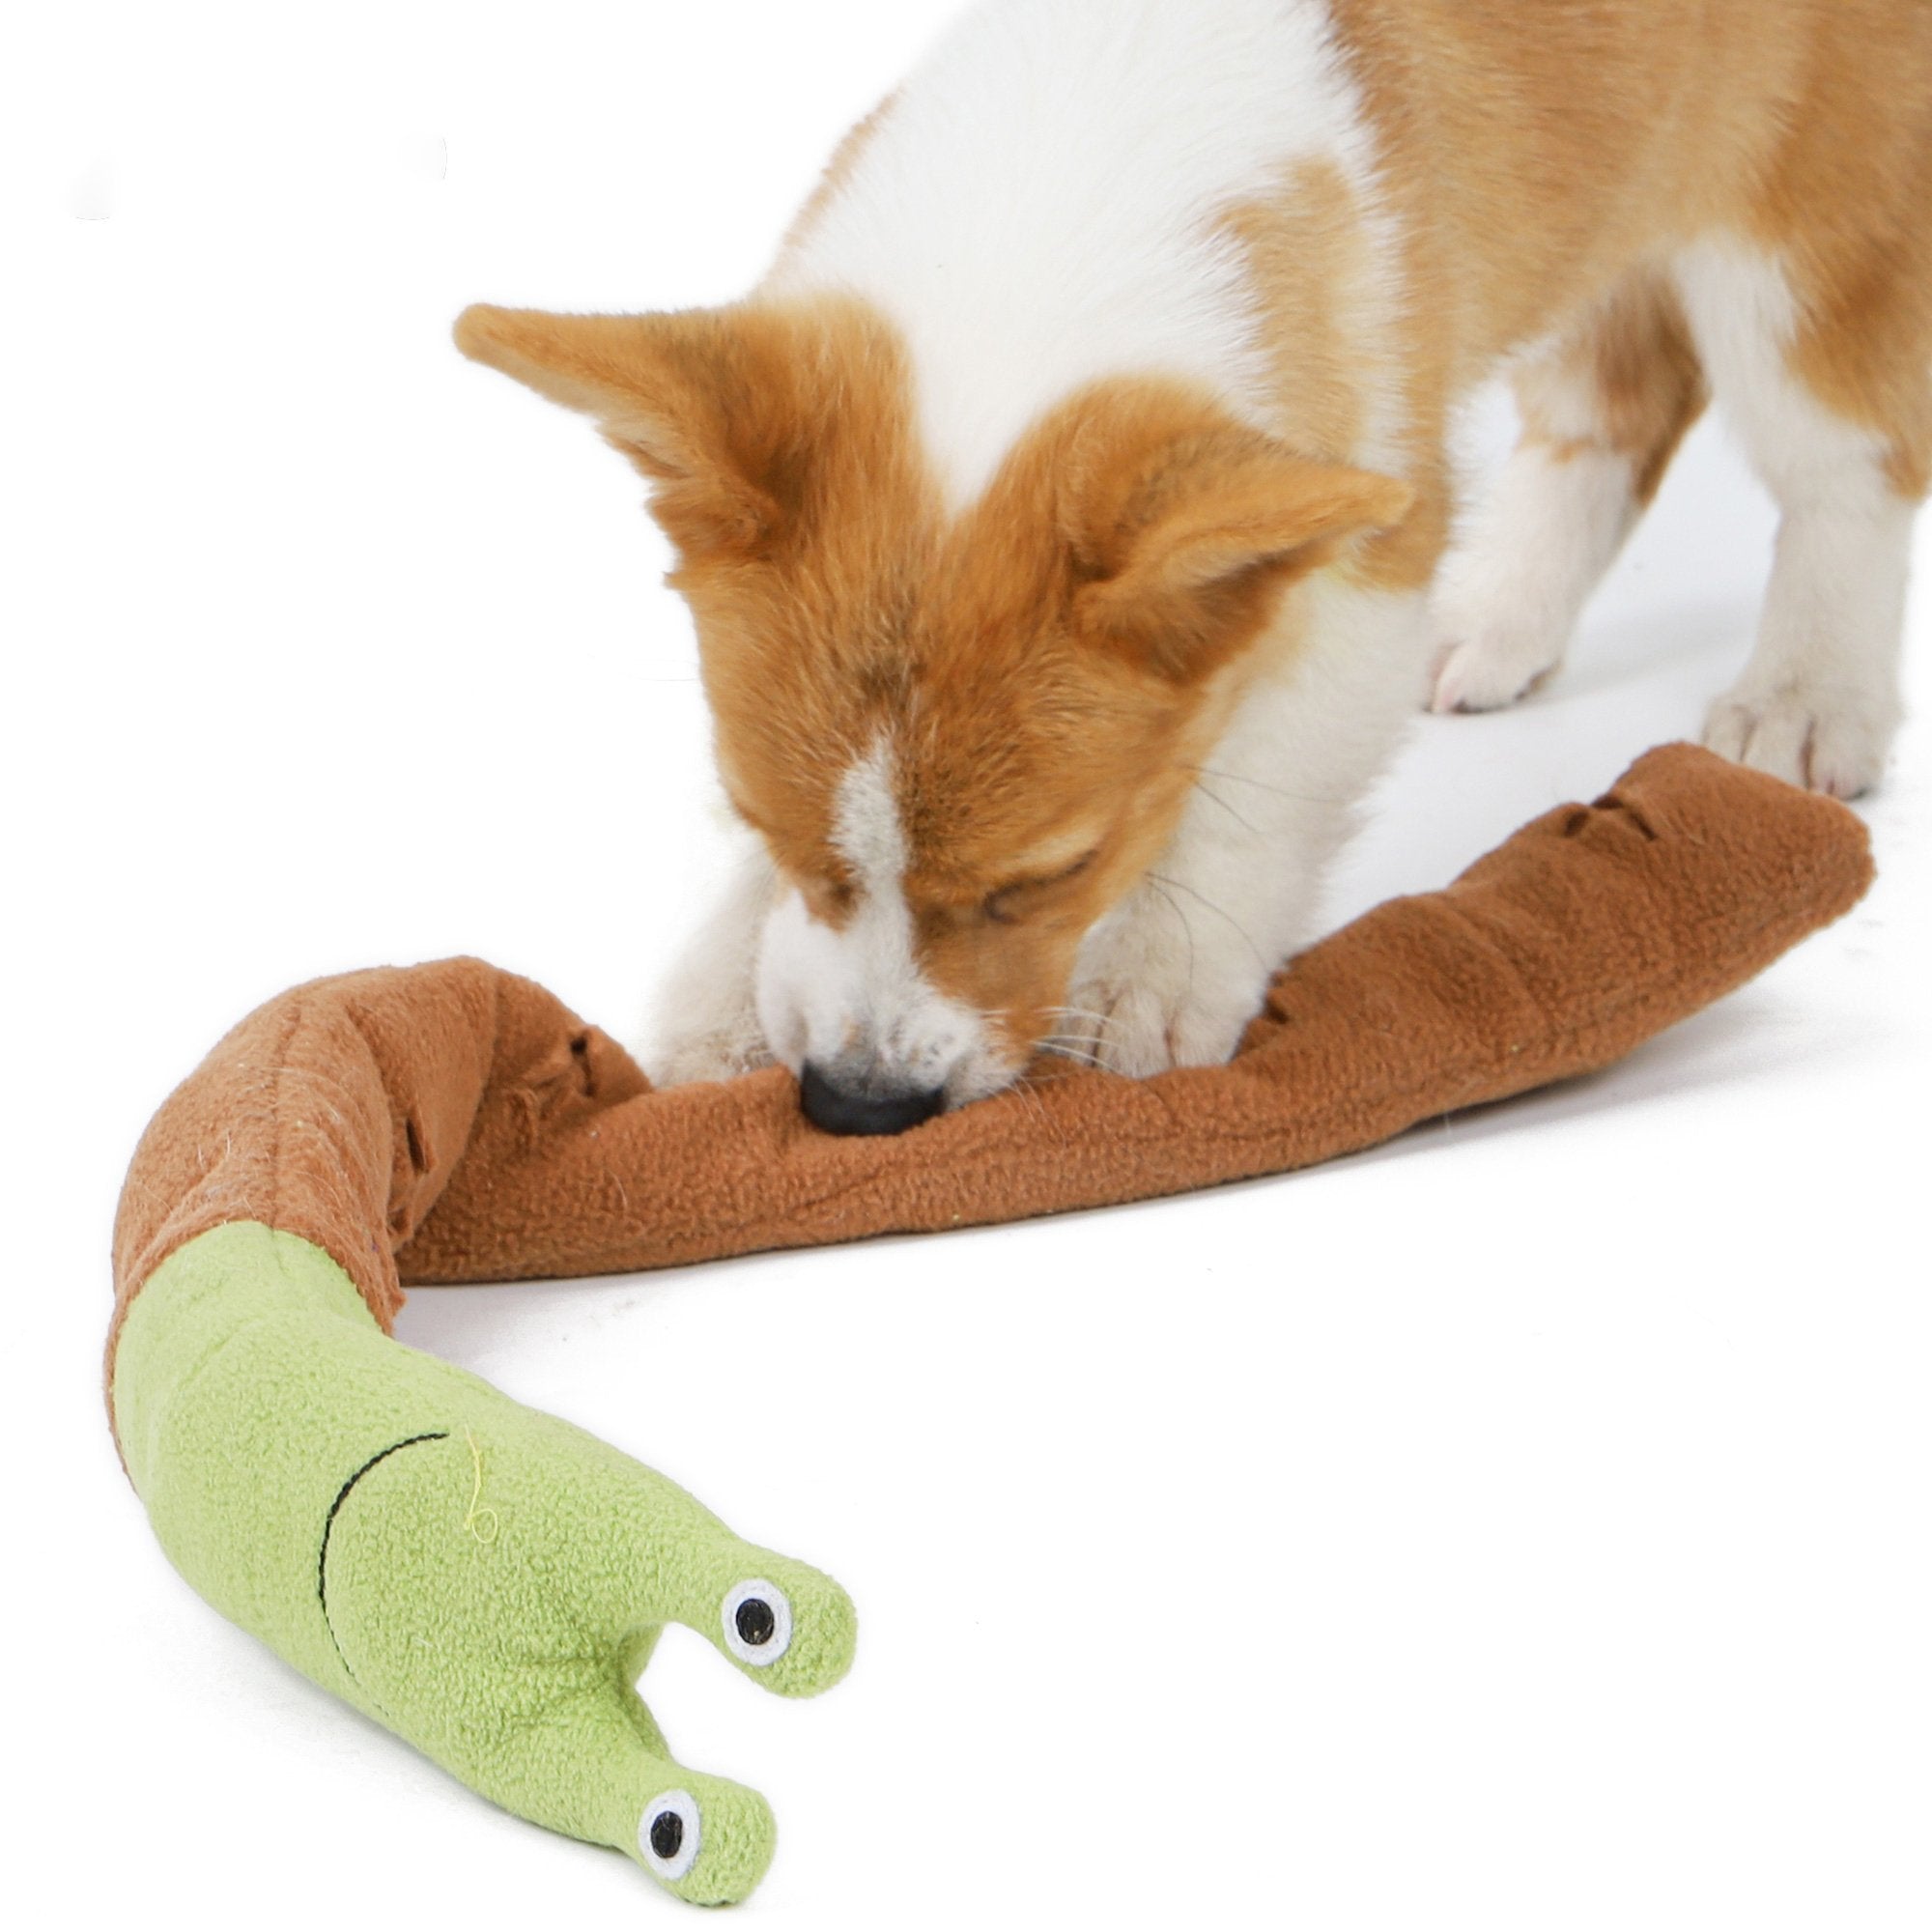 ARTICHOKE - Enrichment and Interactive Dog Toy